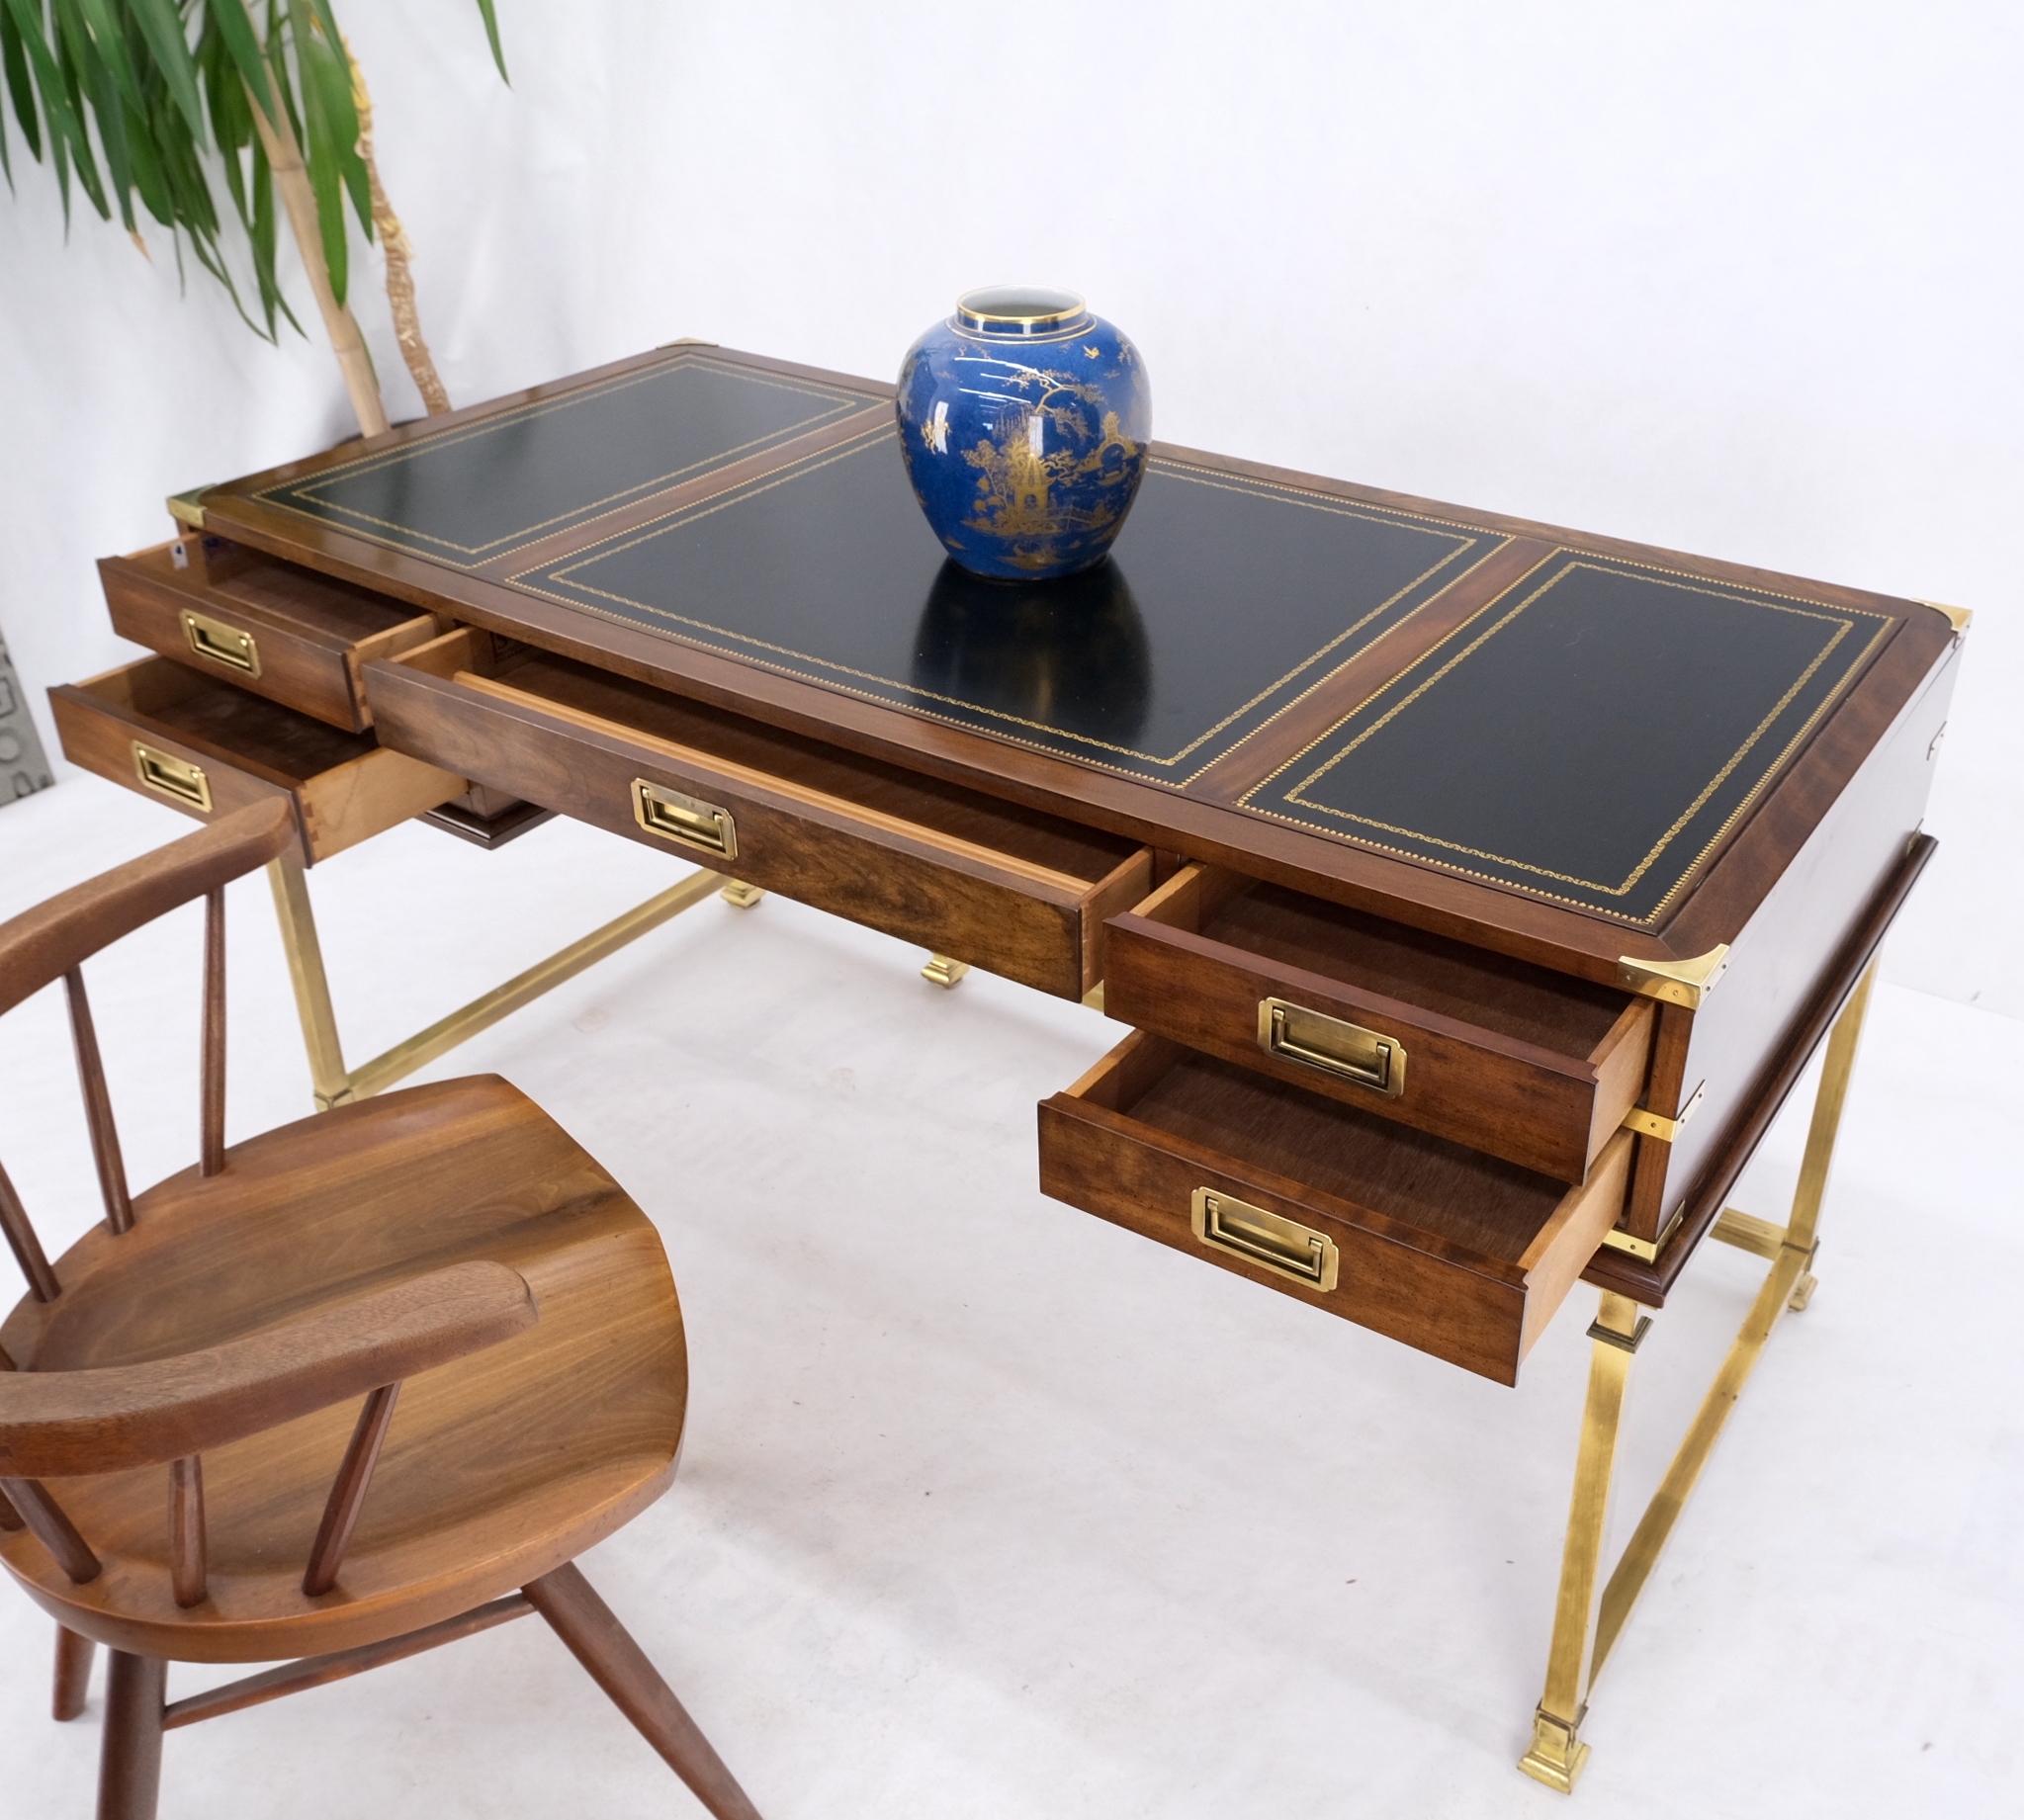 Brass base leather tooled top campaign style desk by Slight Mint.